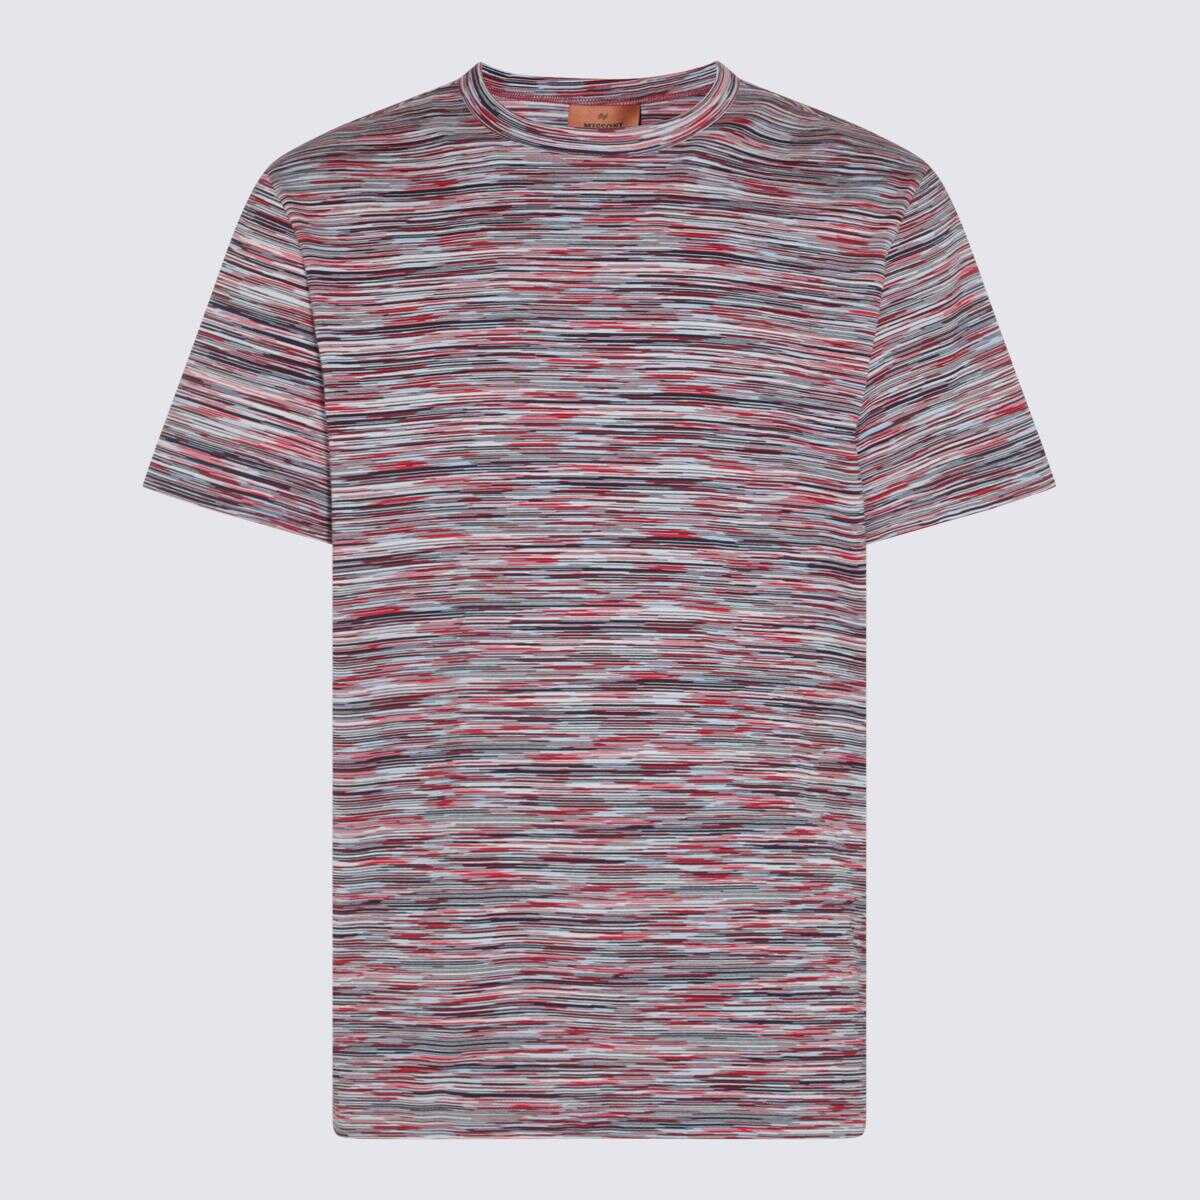 MISSONI BEACHWEAR MISSONI MULTICOLOR COTTON T-SHIRT RED AND BLUE SPACE DYED